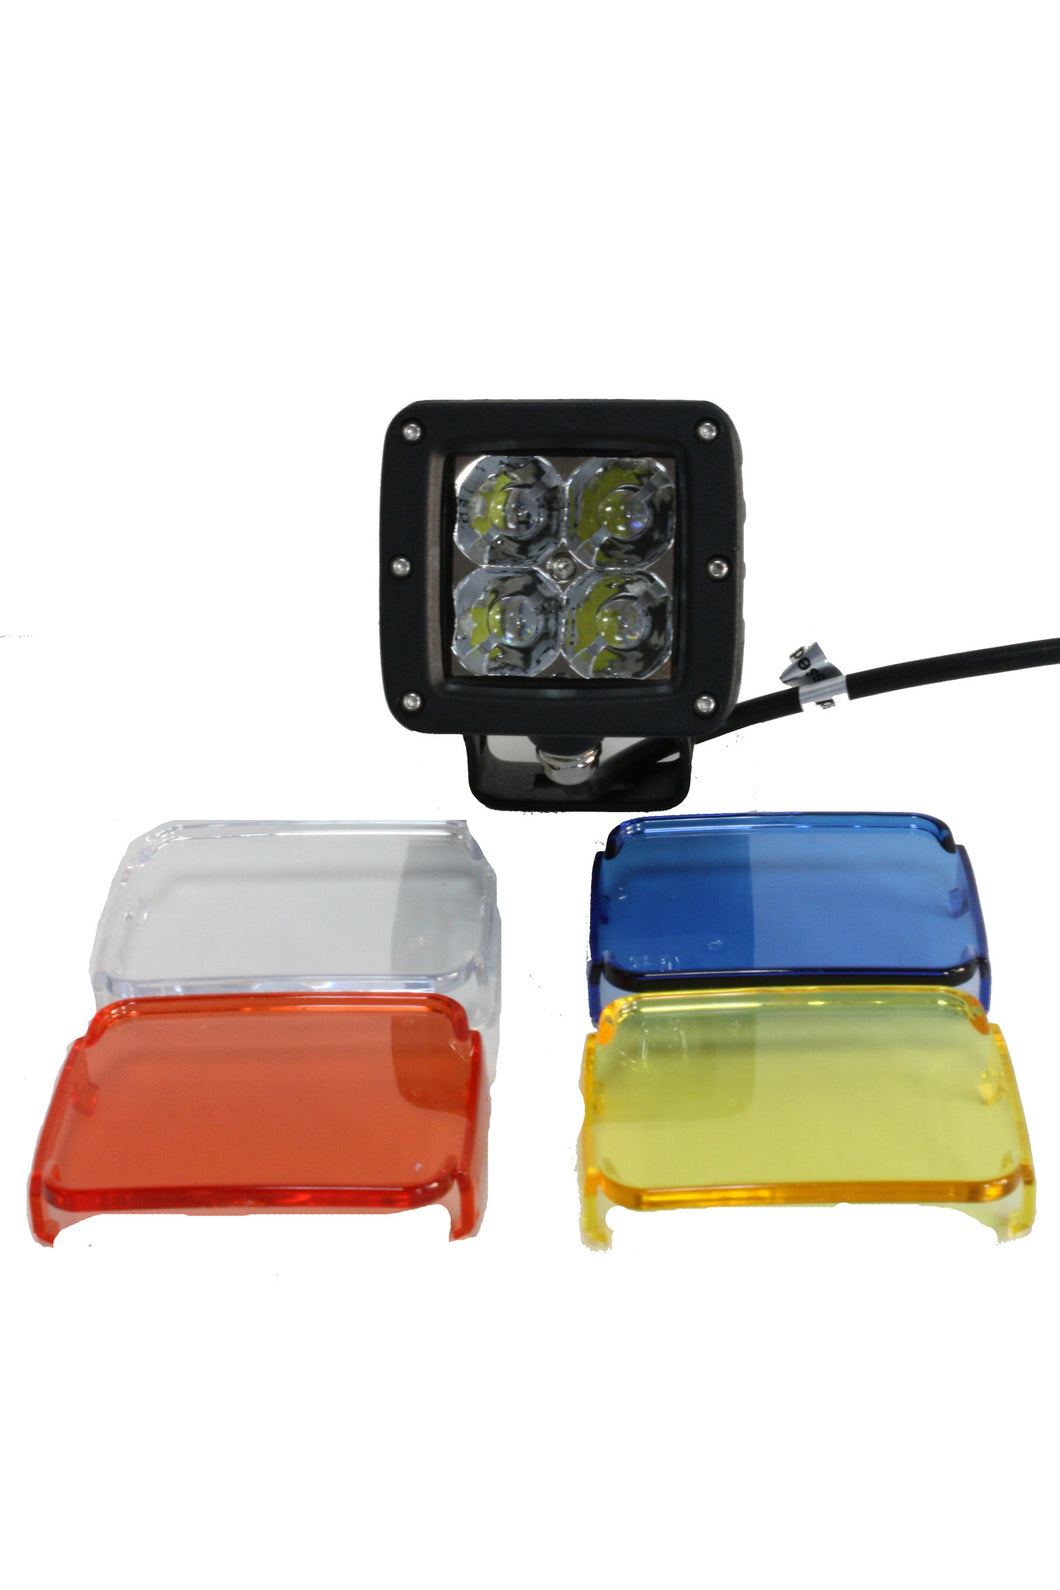 DuraSeries Spot LED Cube